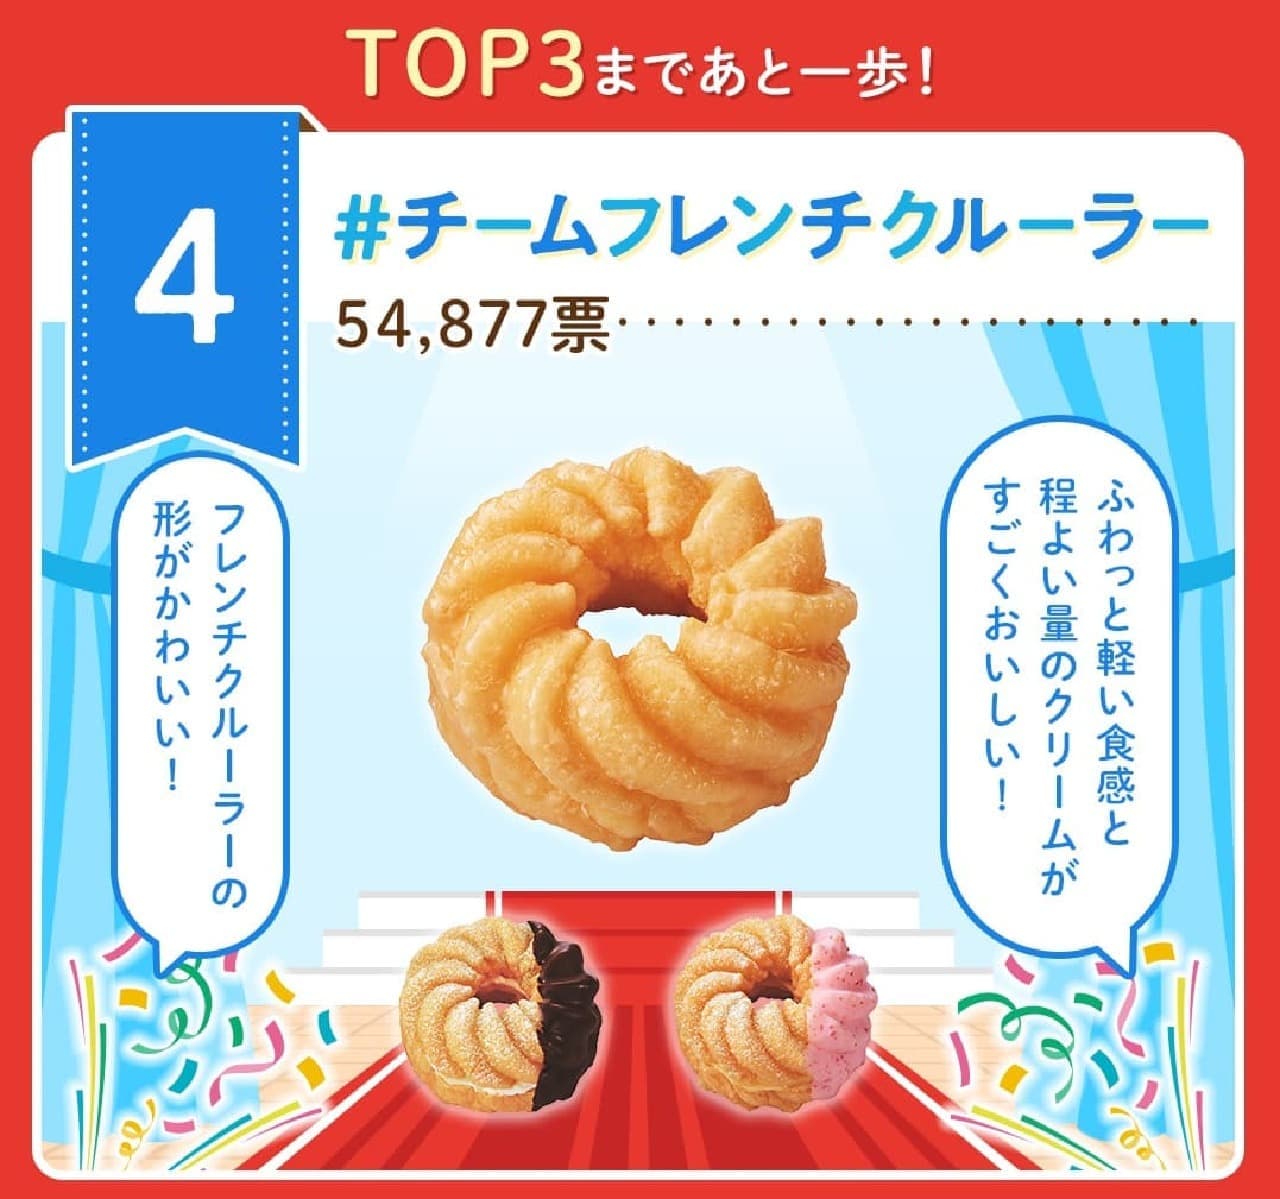 Mr. Donut "#Suishido General Election 2023" results announced.